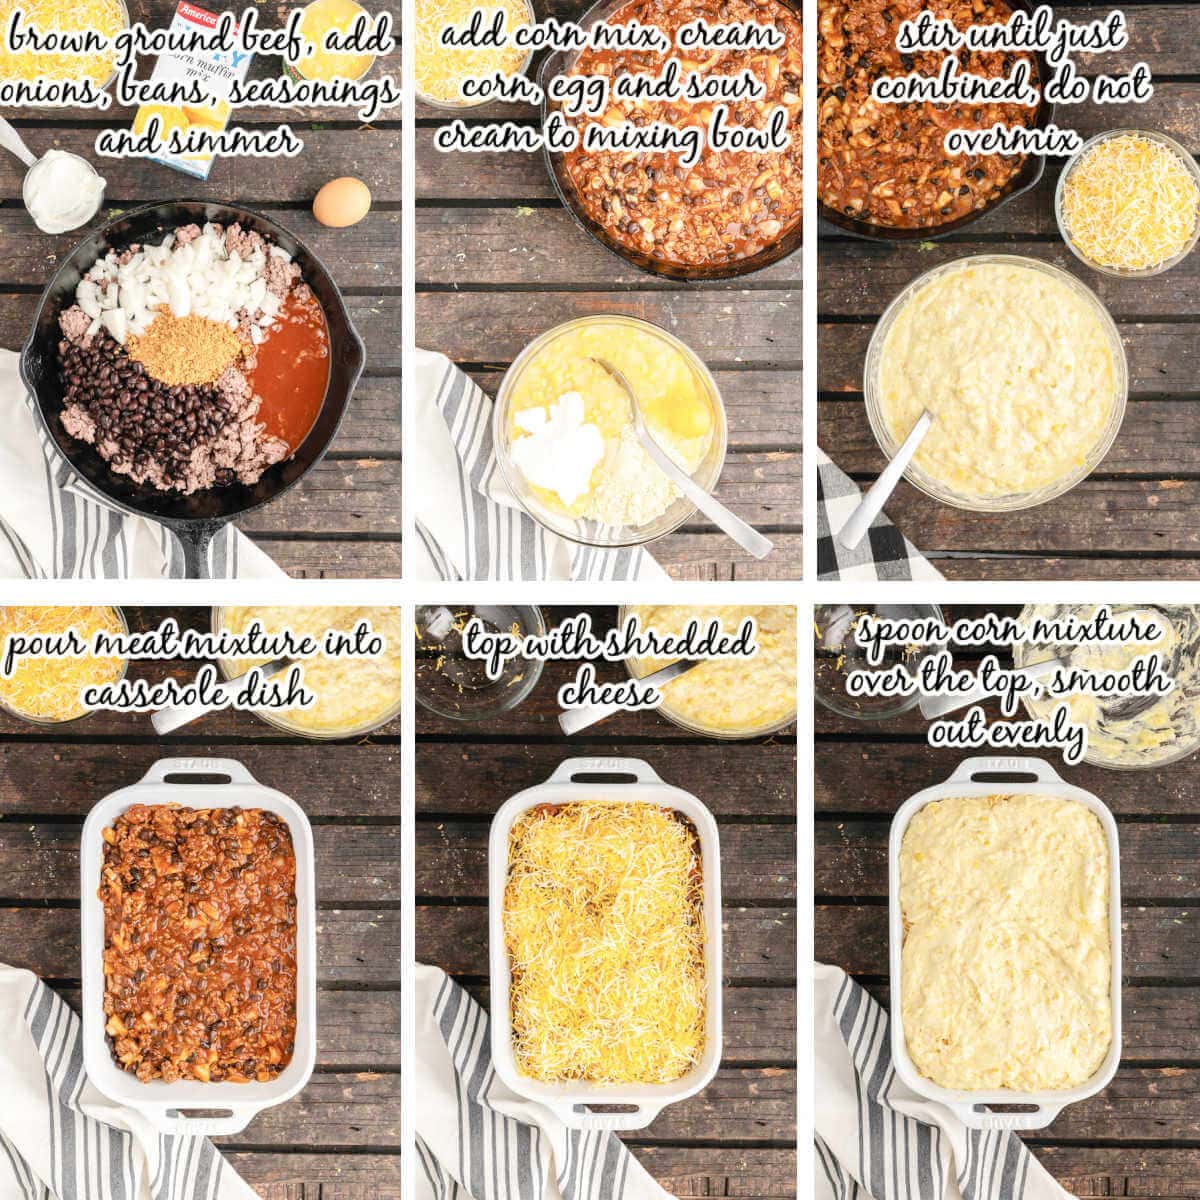 Step by step instructions to make tamale pie recipe, with print overlay.